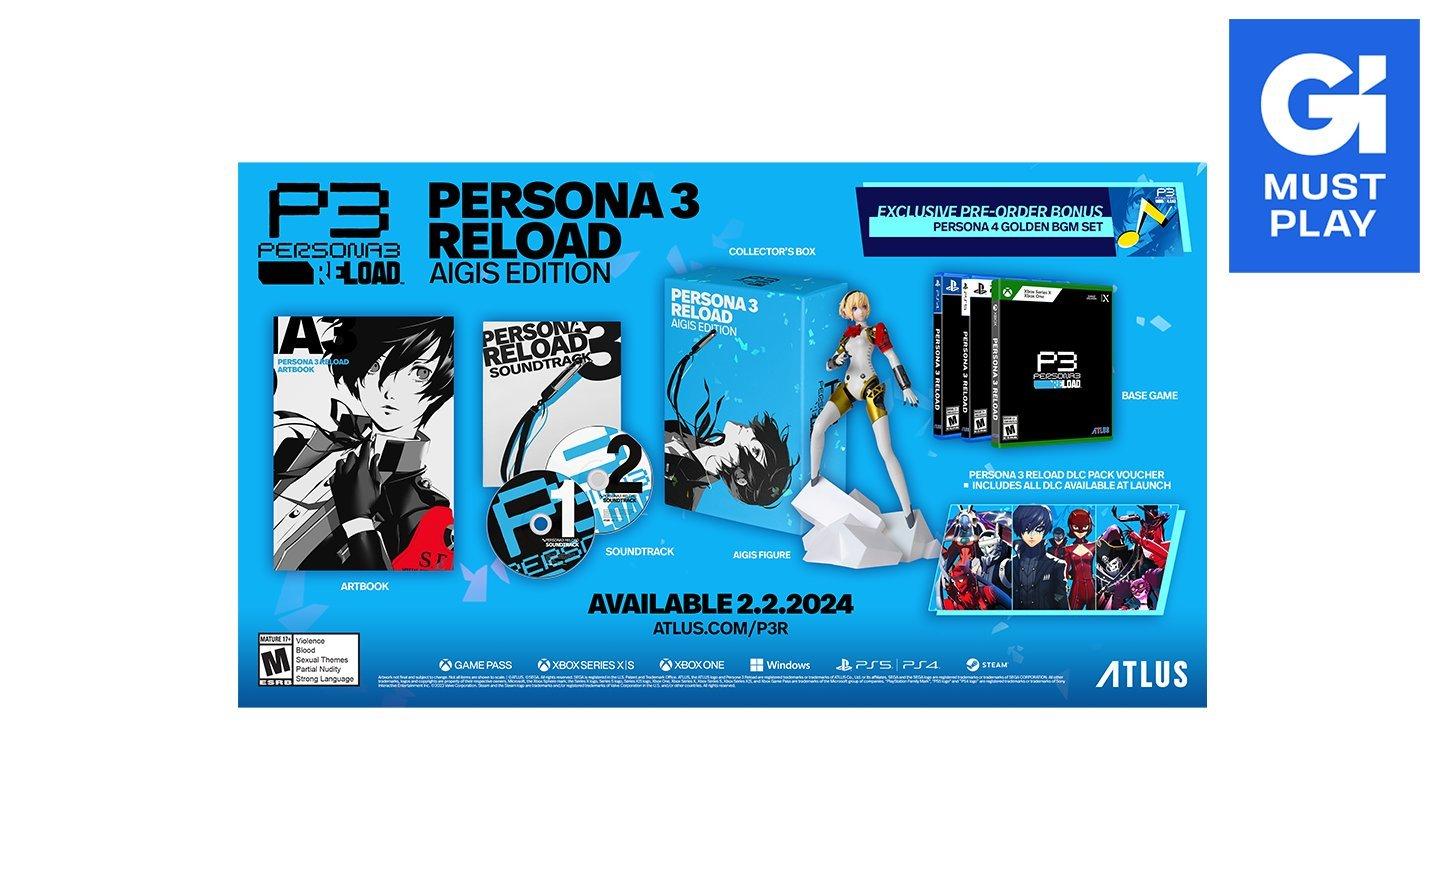 PS5 ver.) Persona 3 Reload Atlus D Shop Exclusive Limited Box + DX Set  (Limited Edition)